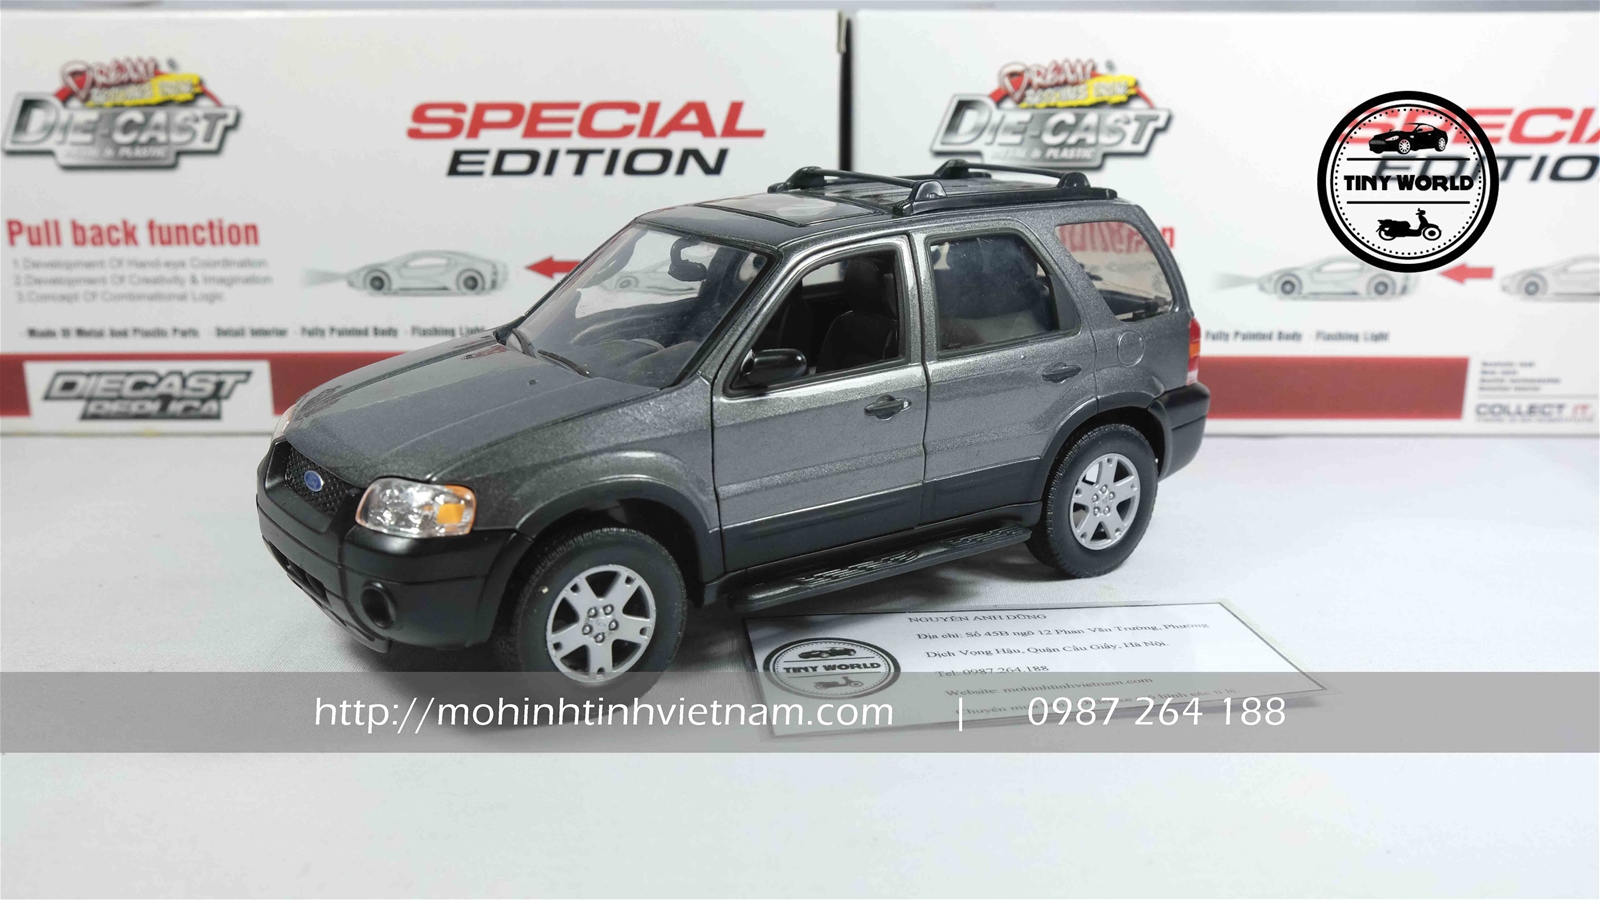 FORD ESCAPE XLT SPORT 2005 (GHI) 1:24 WELLY